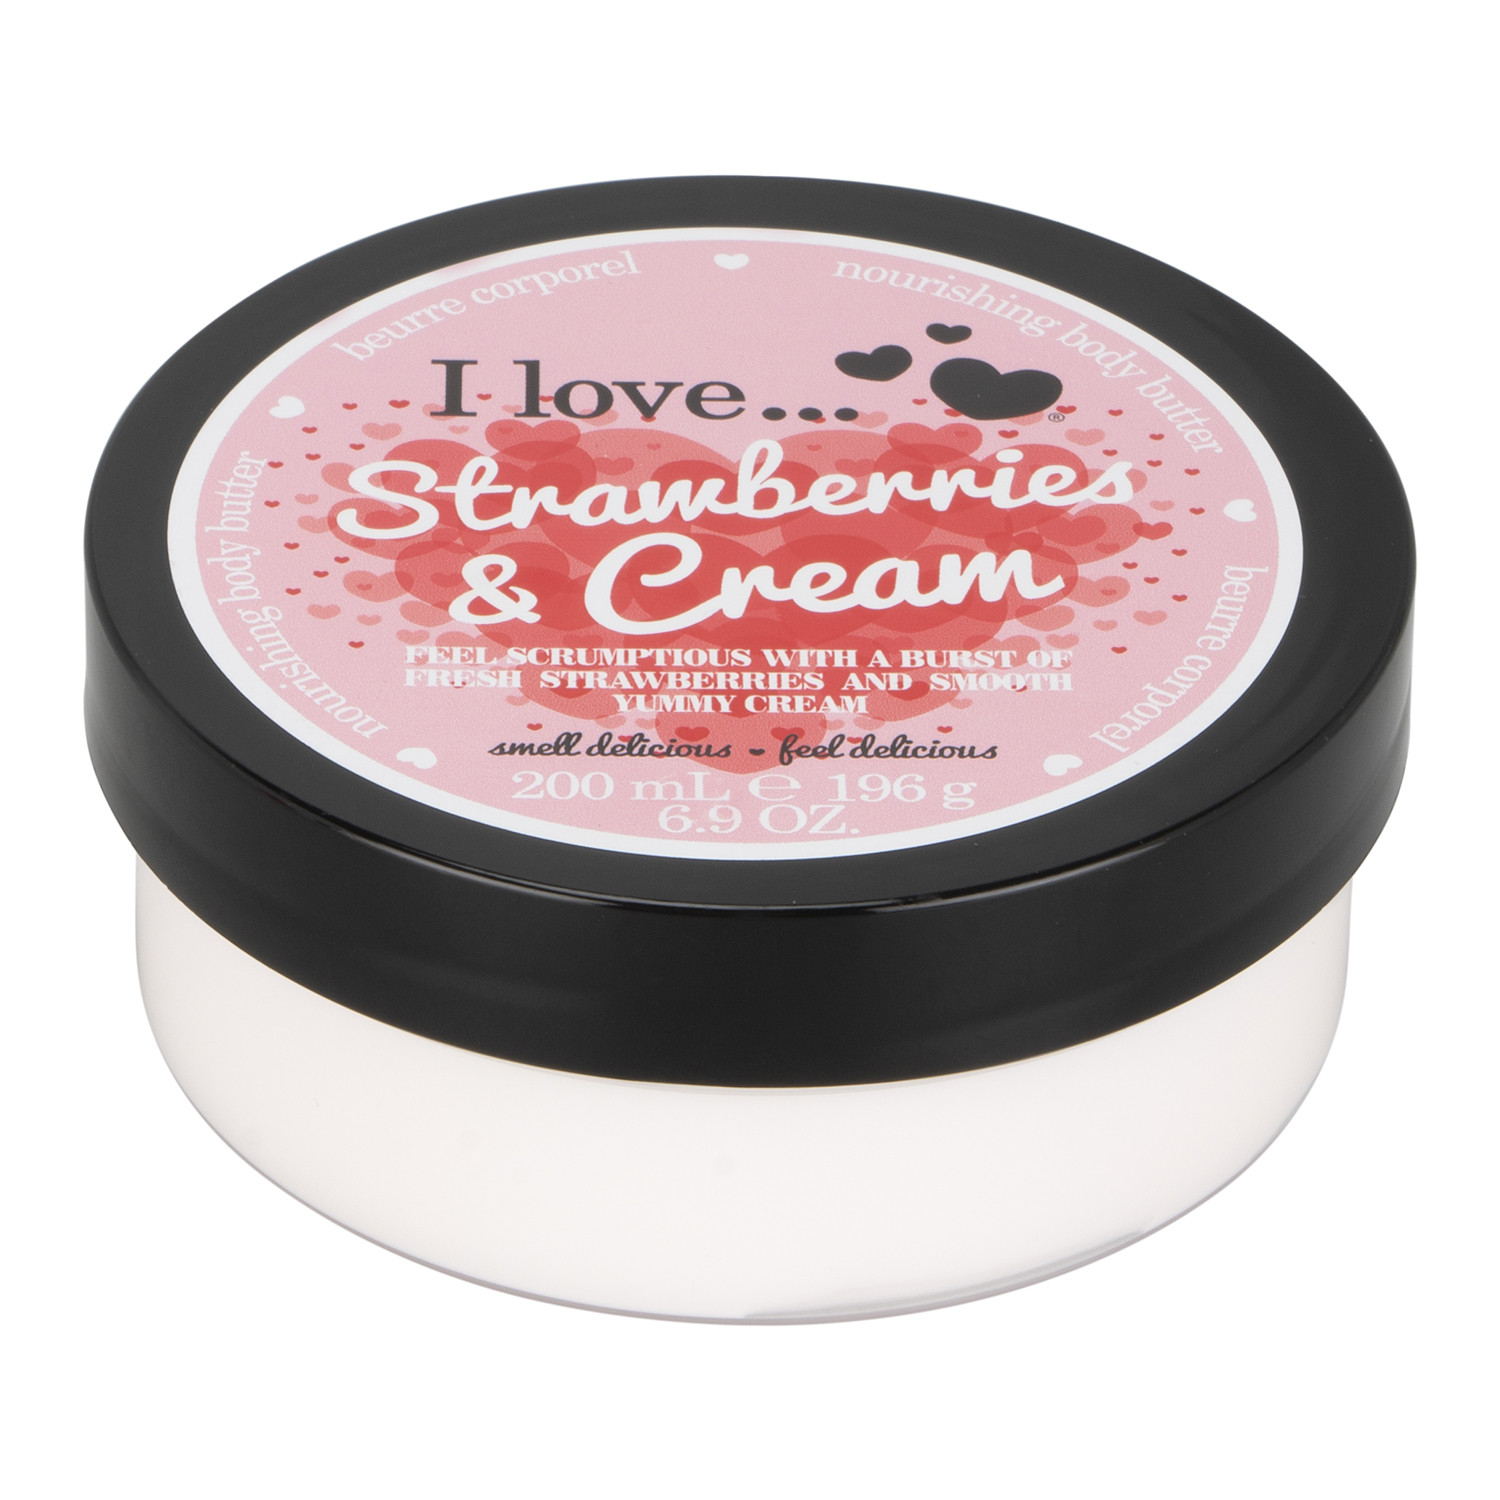 I LOVE Strawberries and Cream Body Butter 200ml Image